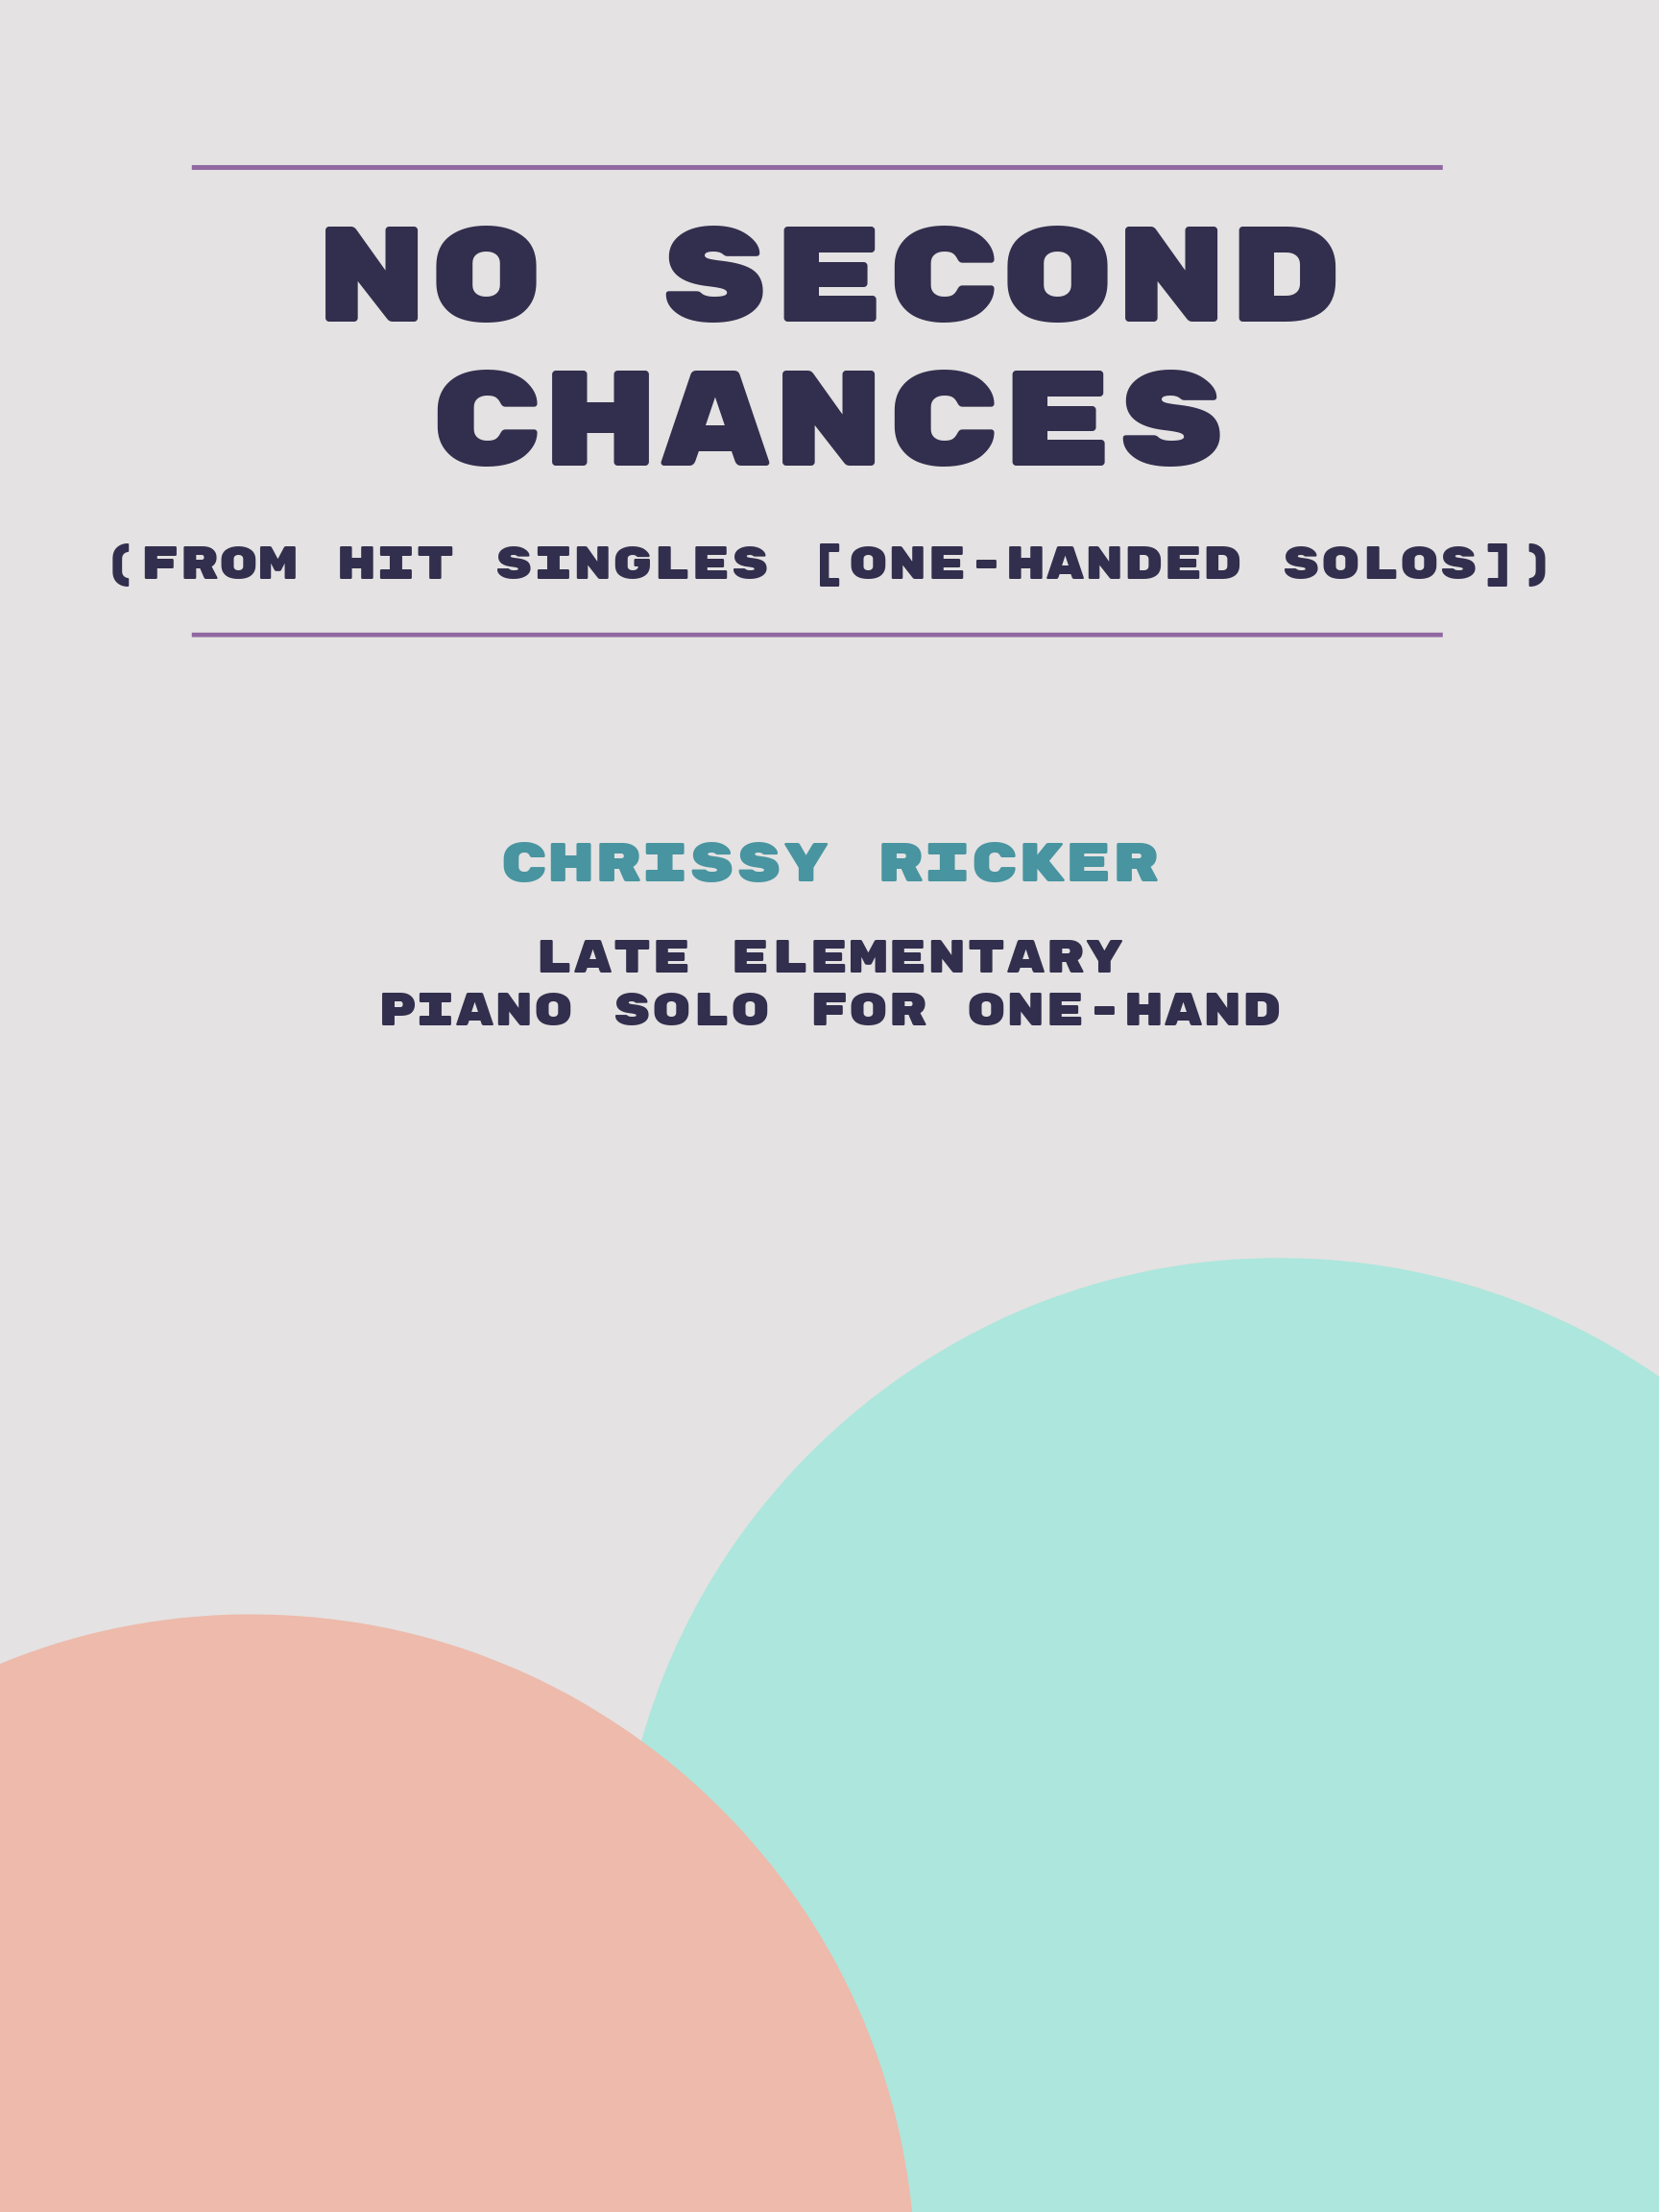 No Second Chances by Chrissy Ricker